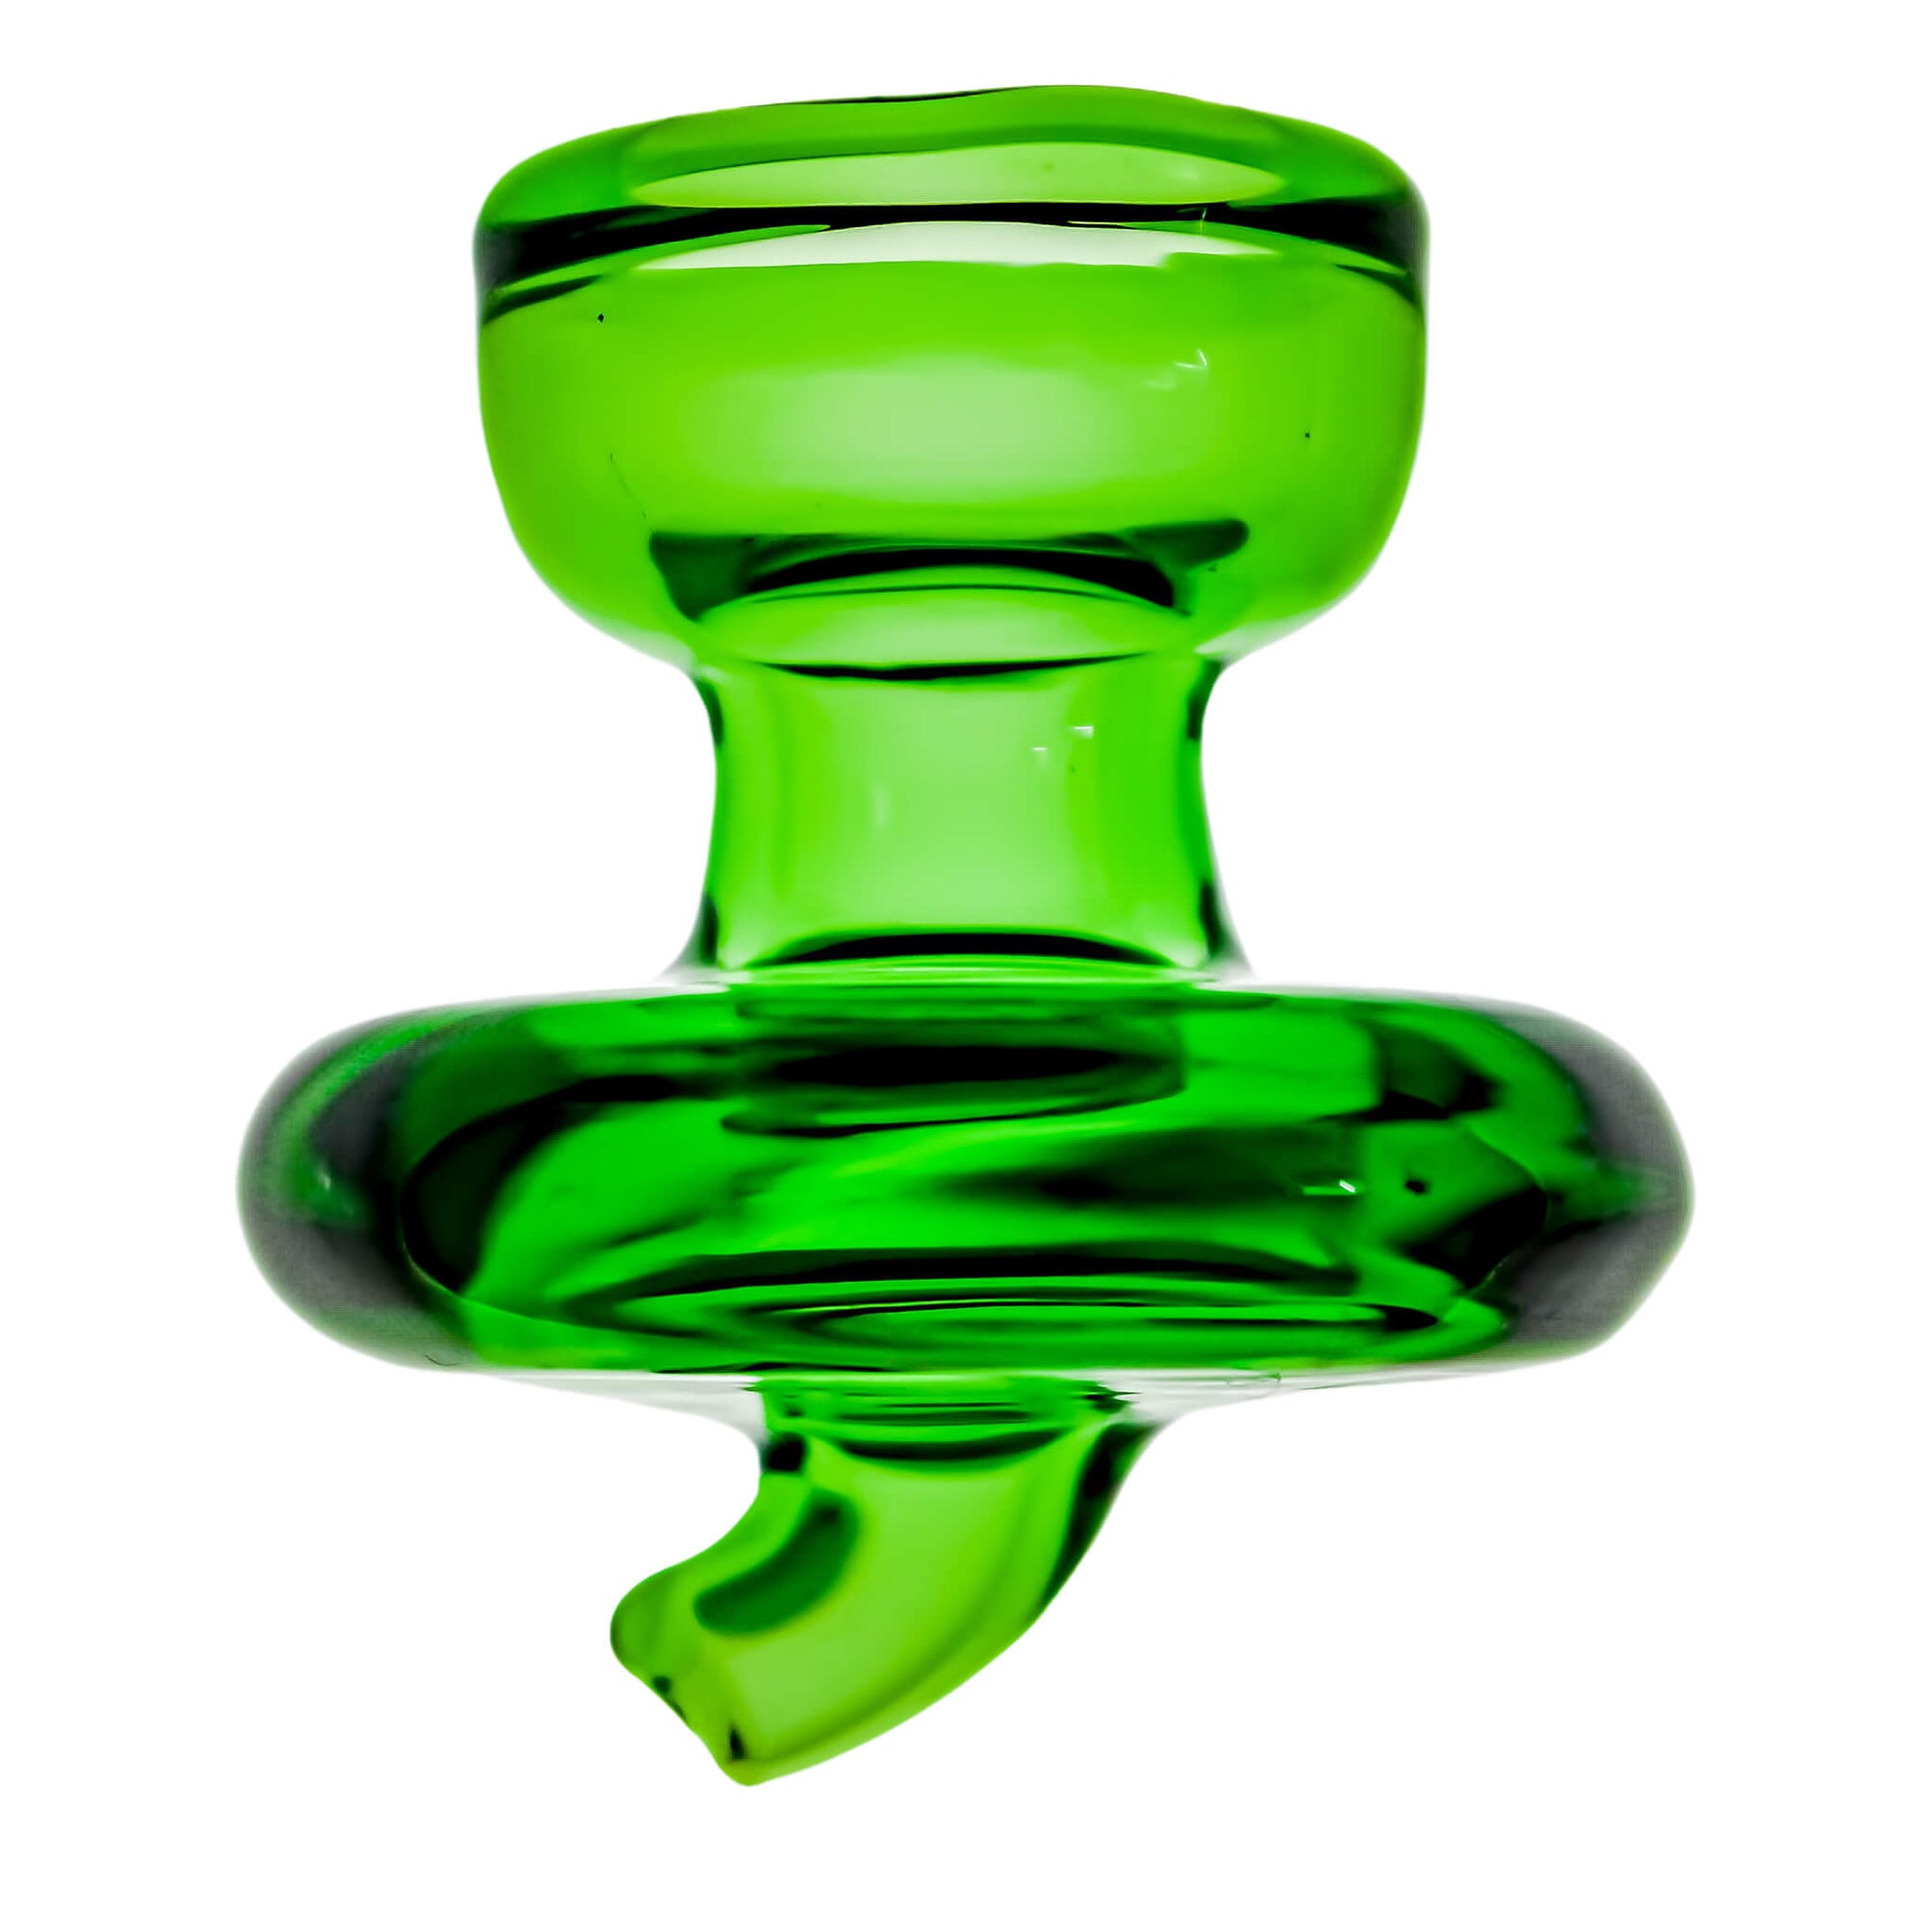 E-Banger Spinner Carb Cap | Capped E-Banger View | the dabbing specialists